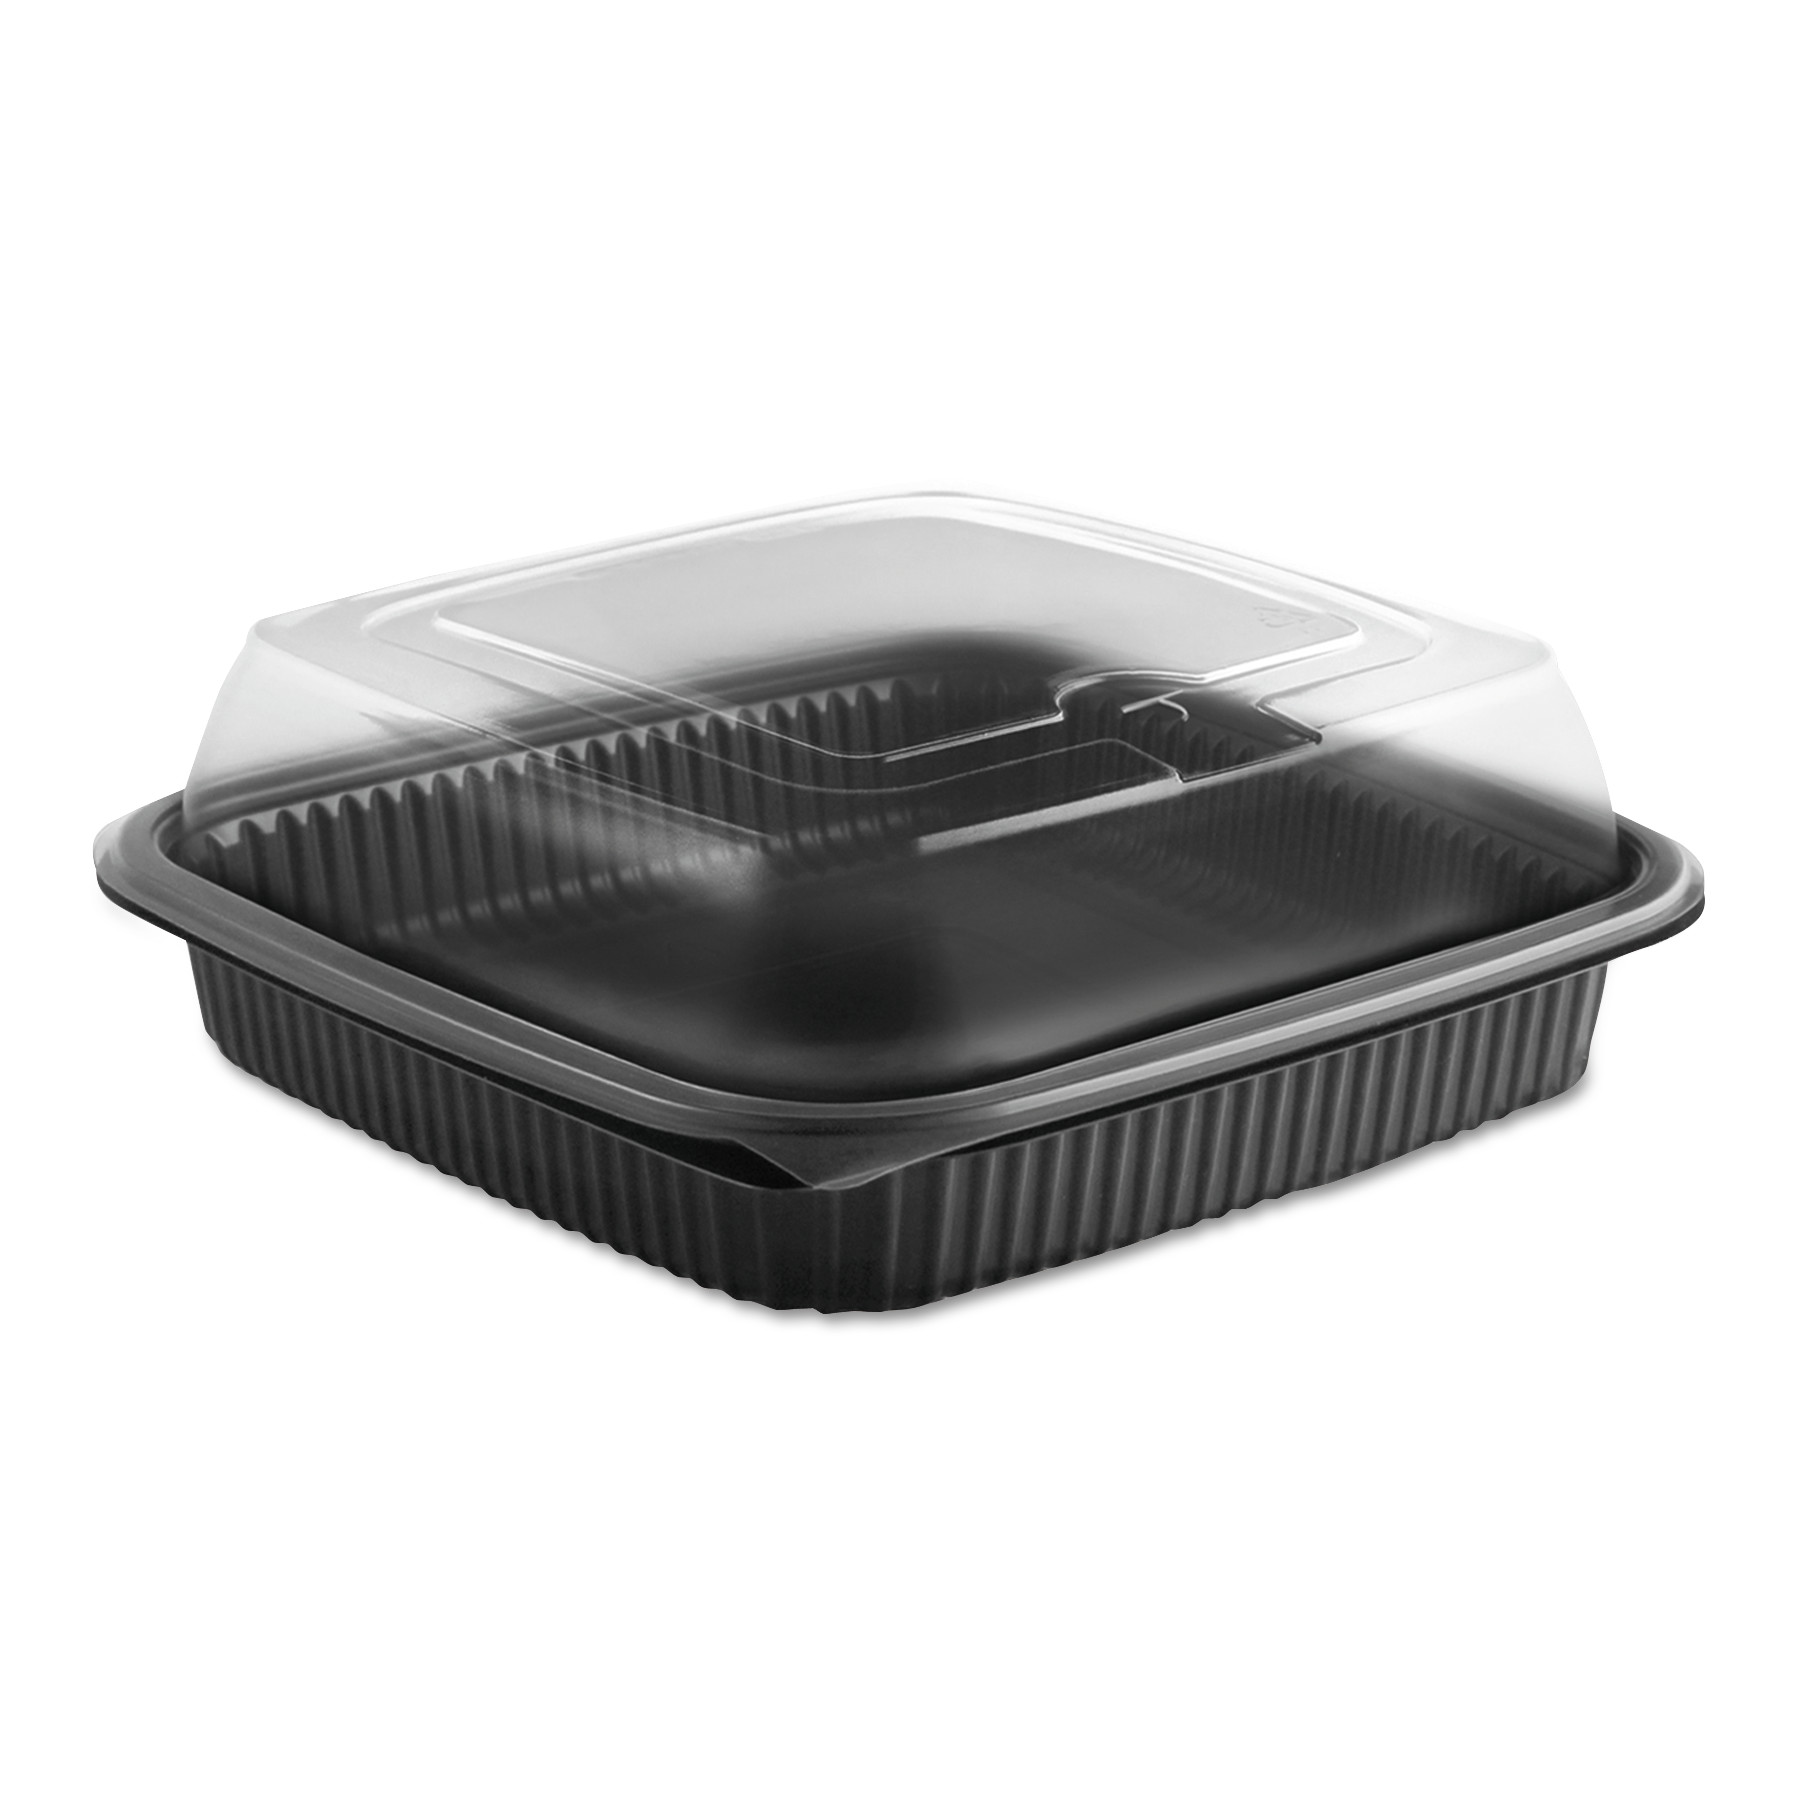 [4118515] 8.5 Combo Pack
Anchor Container Culinary
Squares(150)